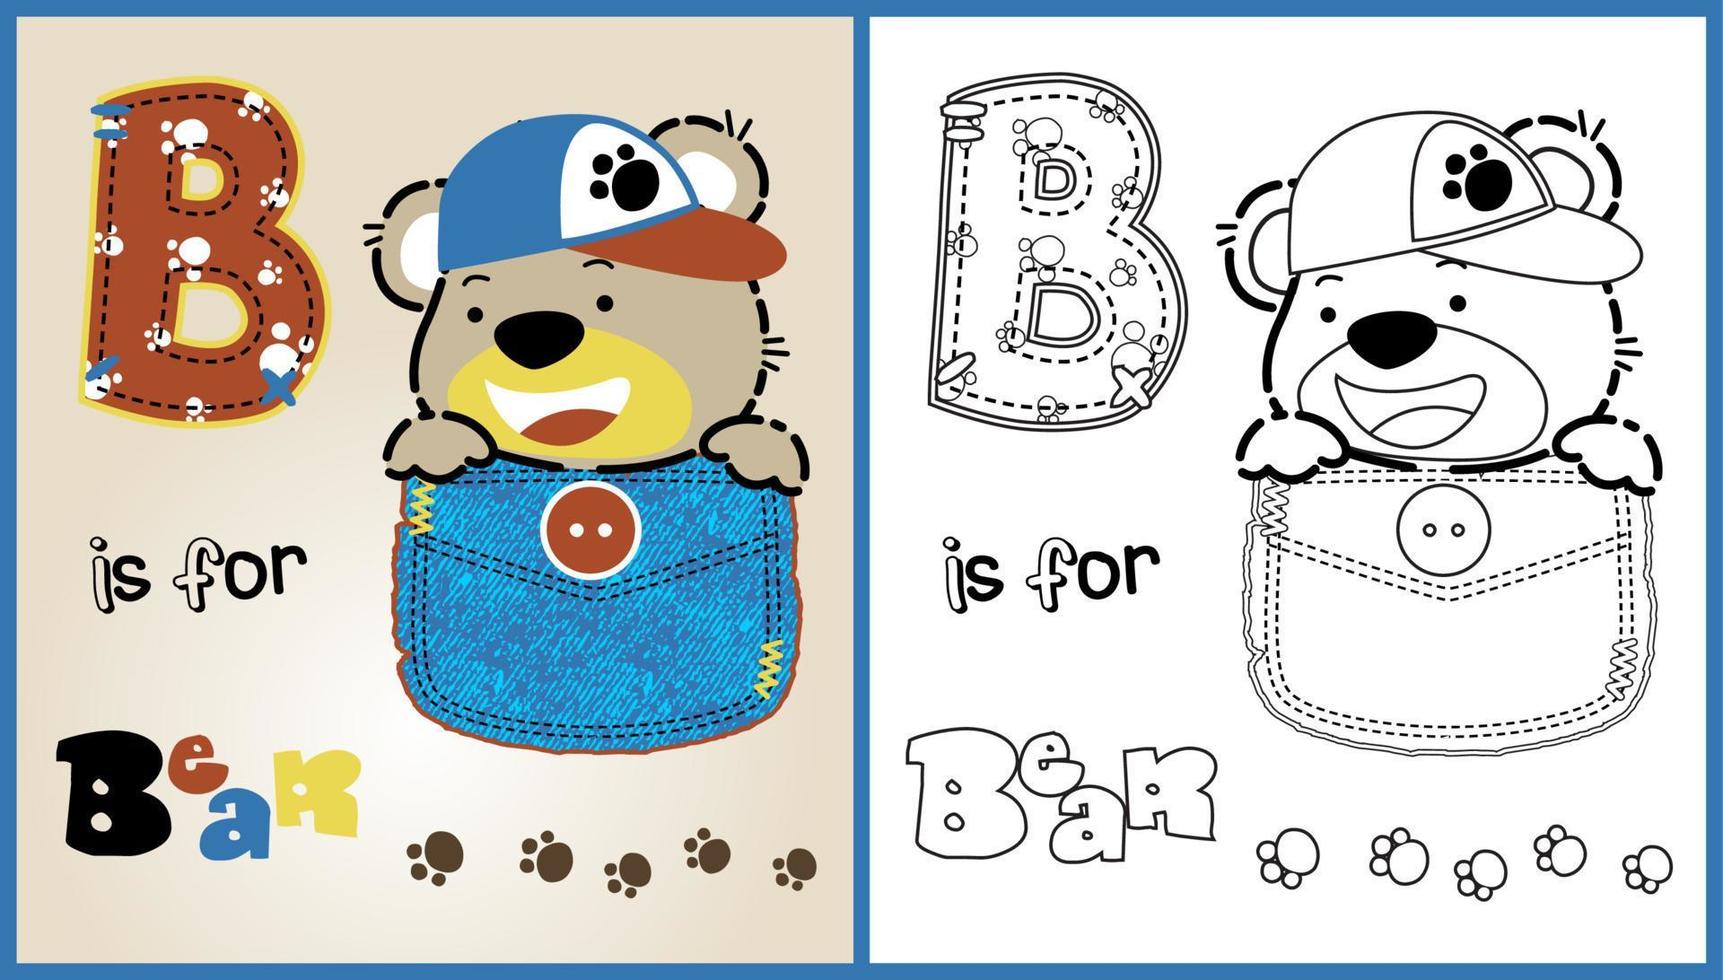 vector cartoon of cute bear on pocket, coloring page or book